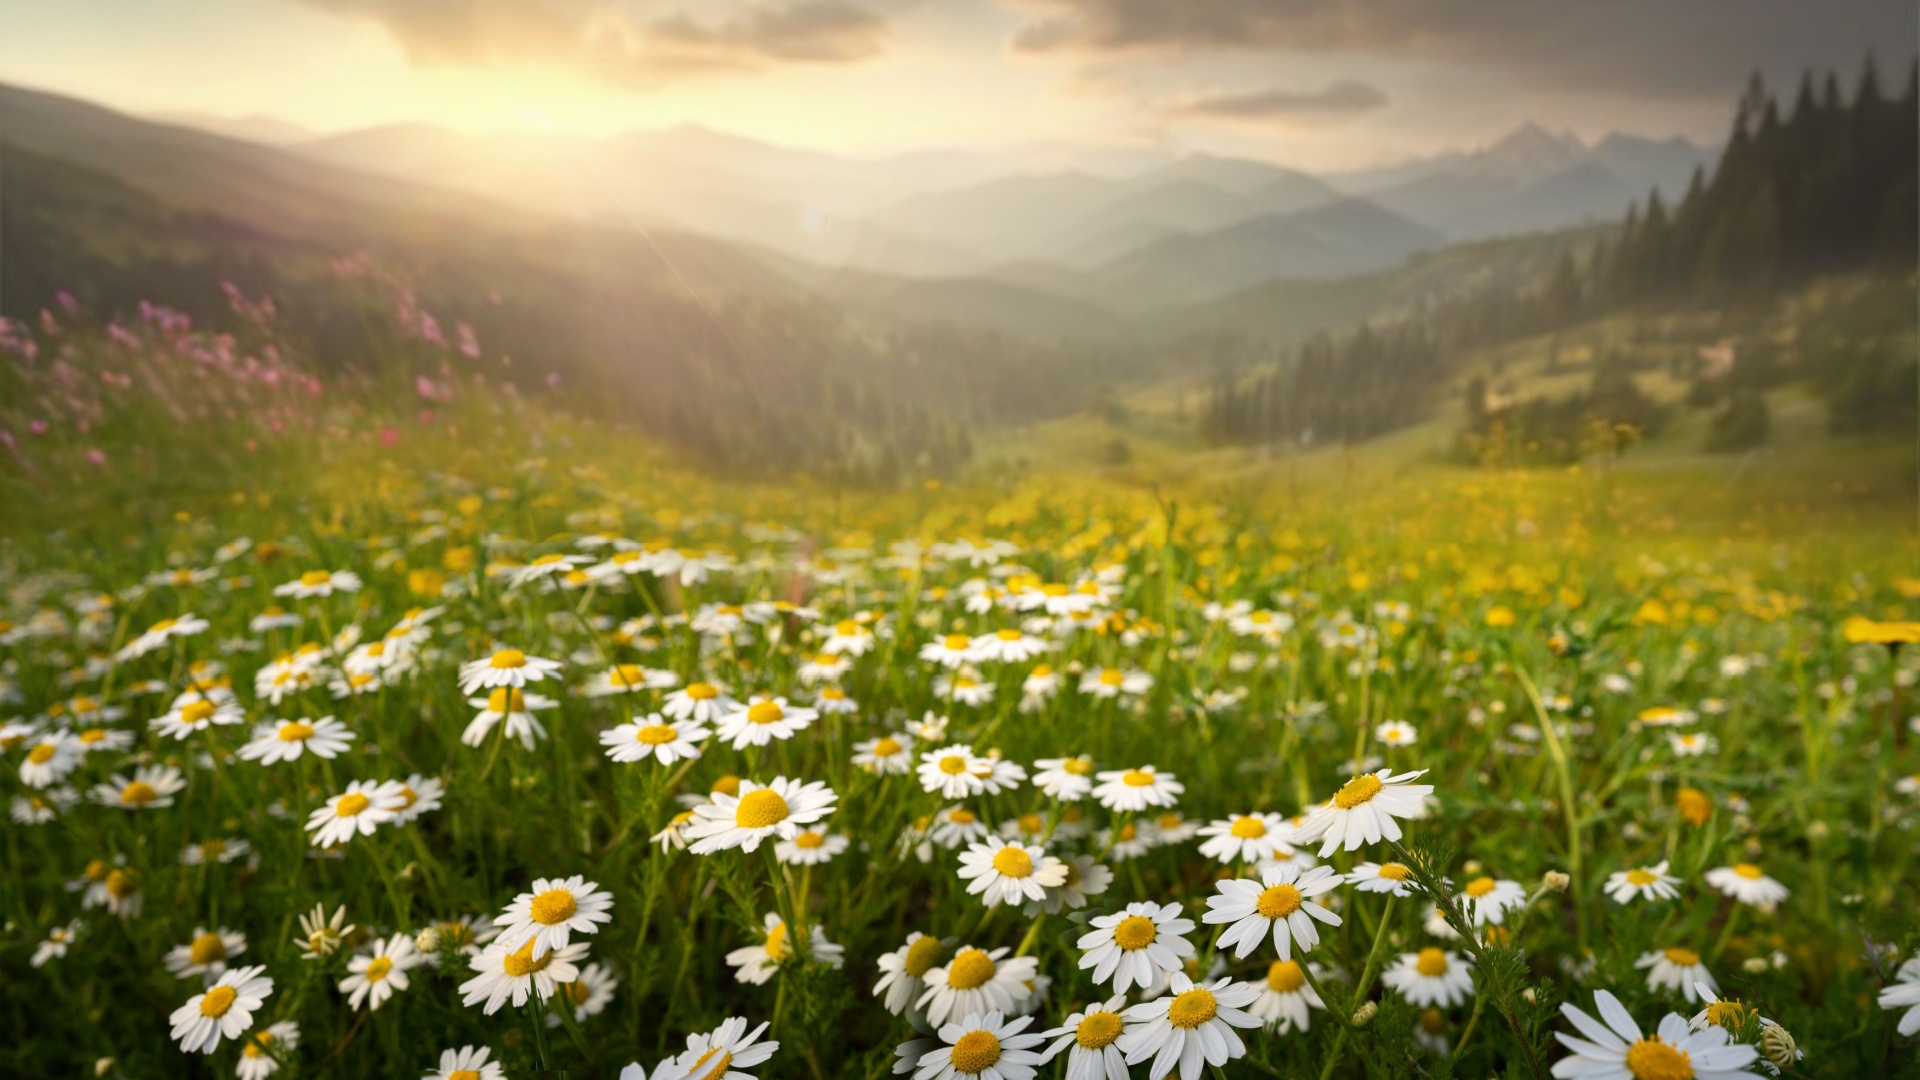 Mountain and daisies